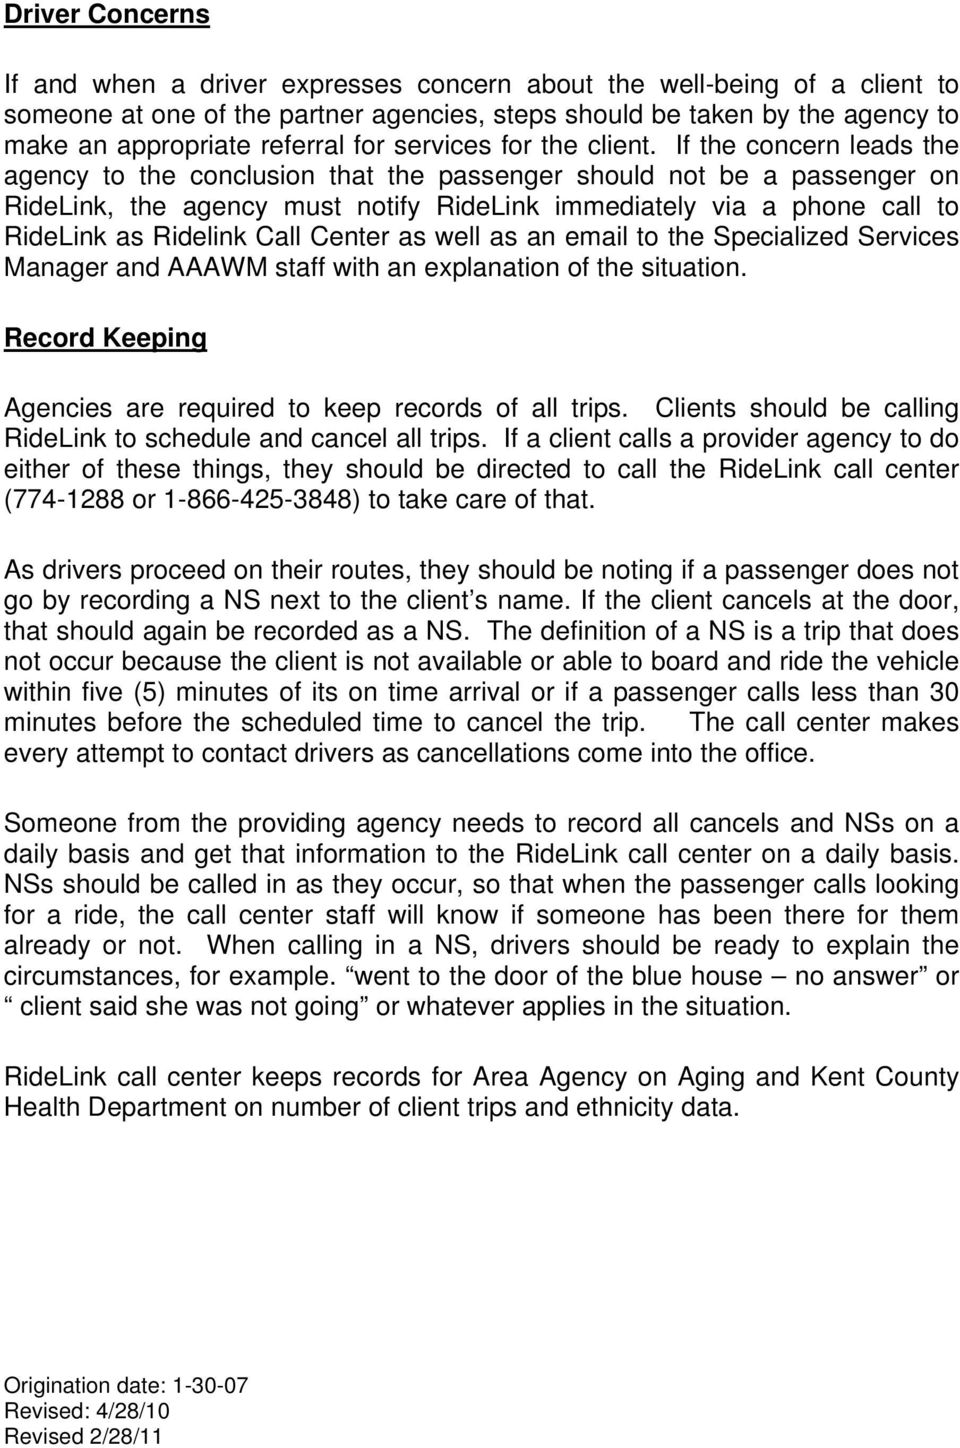 If the concern leads the agency to the conclusion that the passenger should not be a passenger on RideLink, the agency must notify RideLink immediately via a phone call to RideLink as Ridelink Call